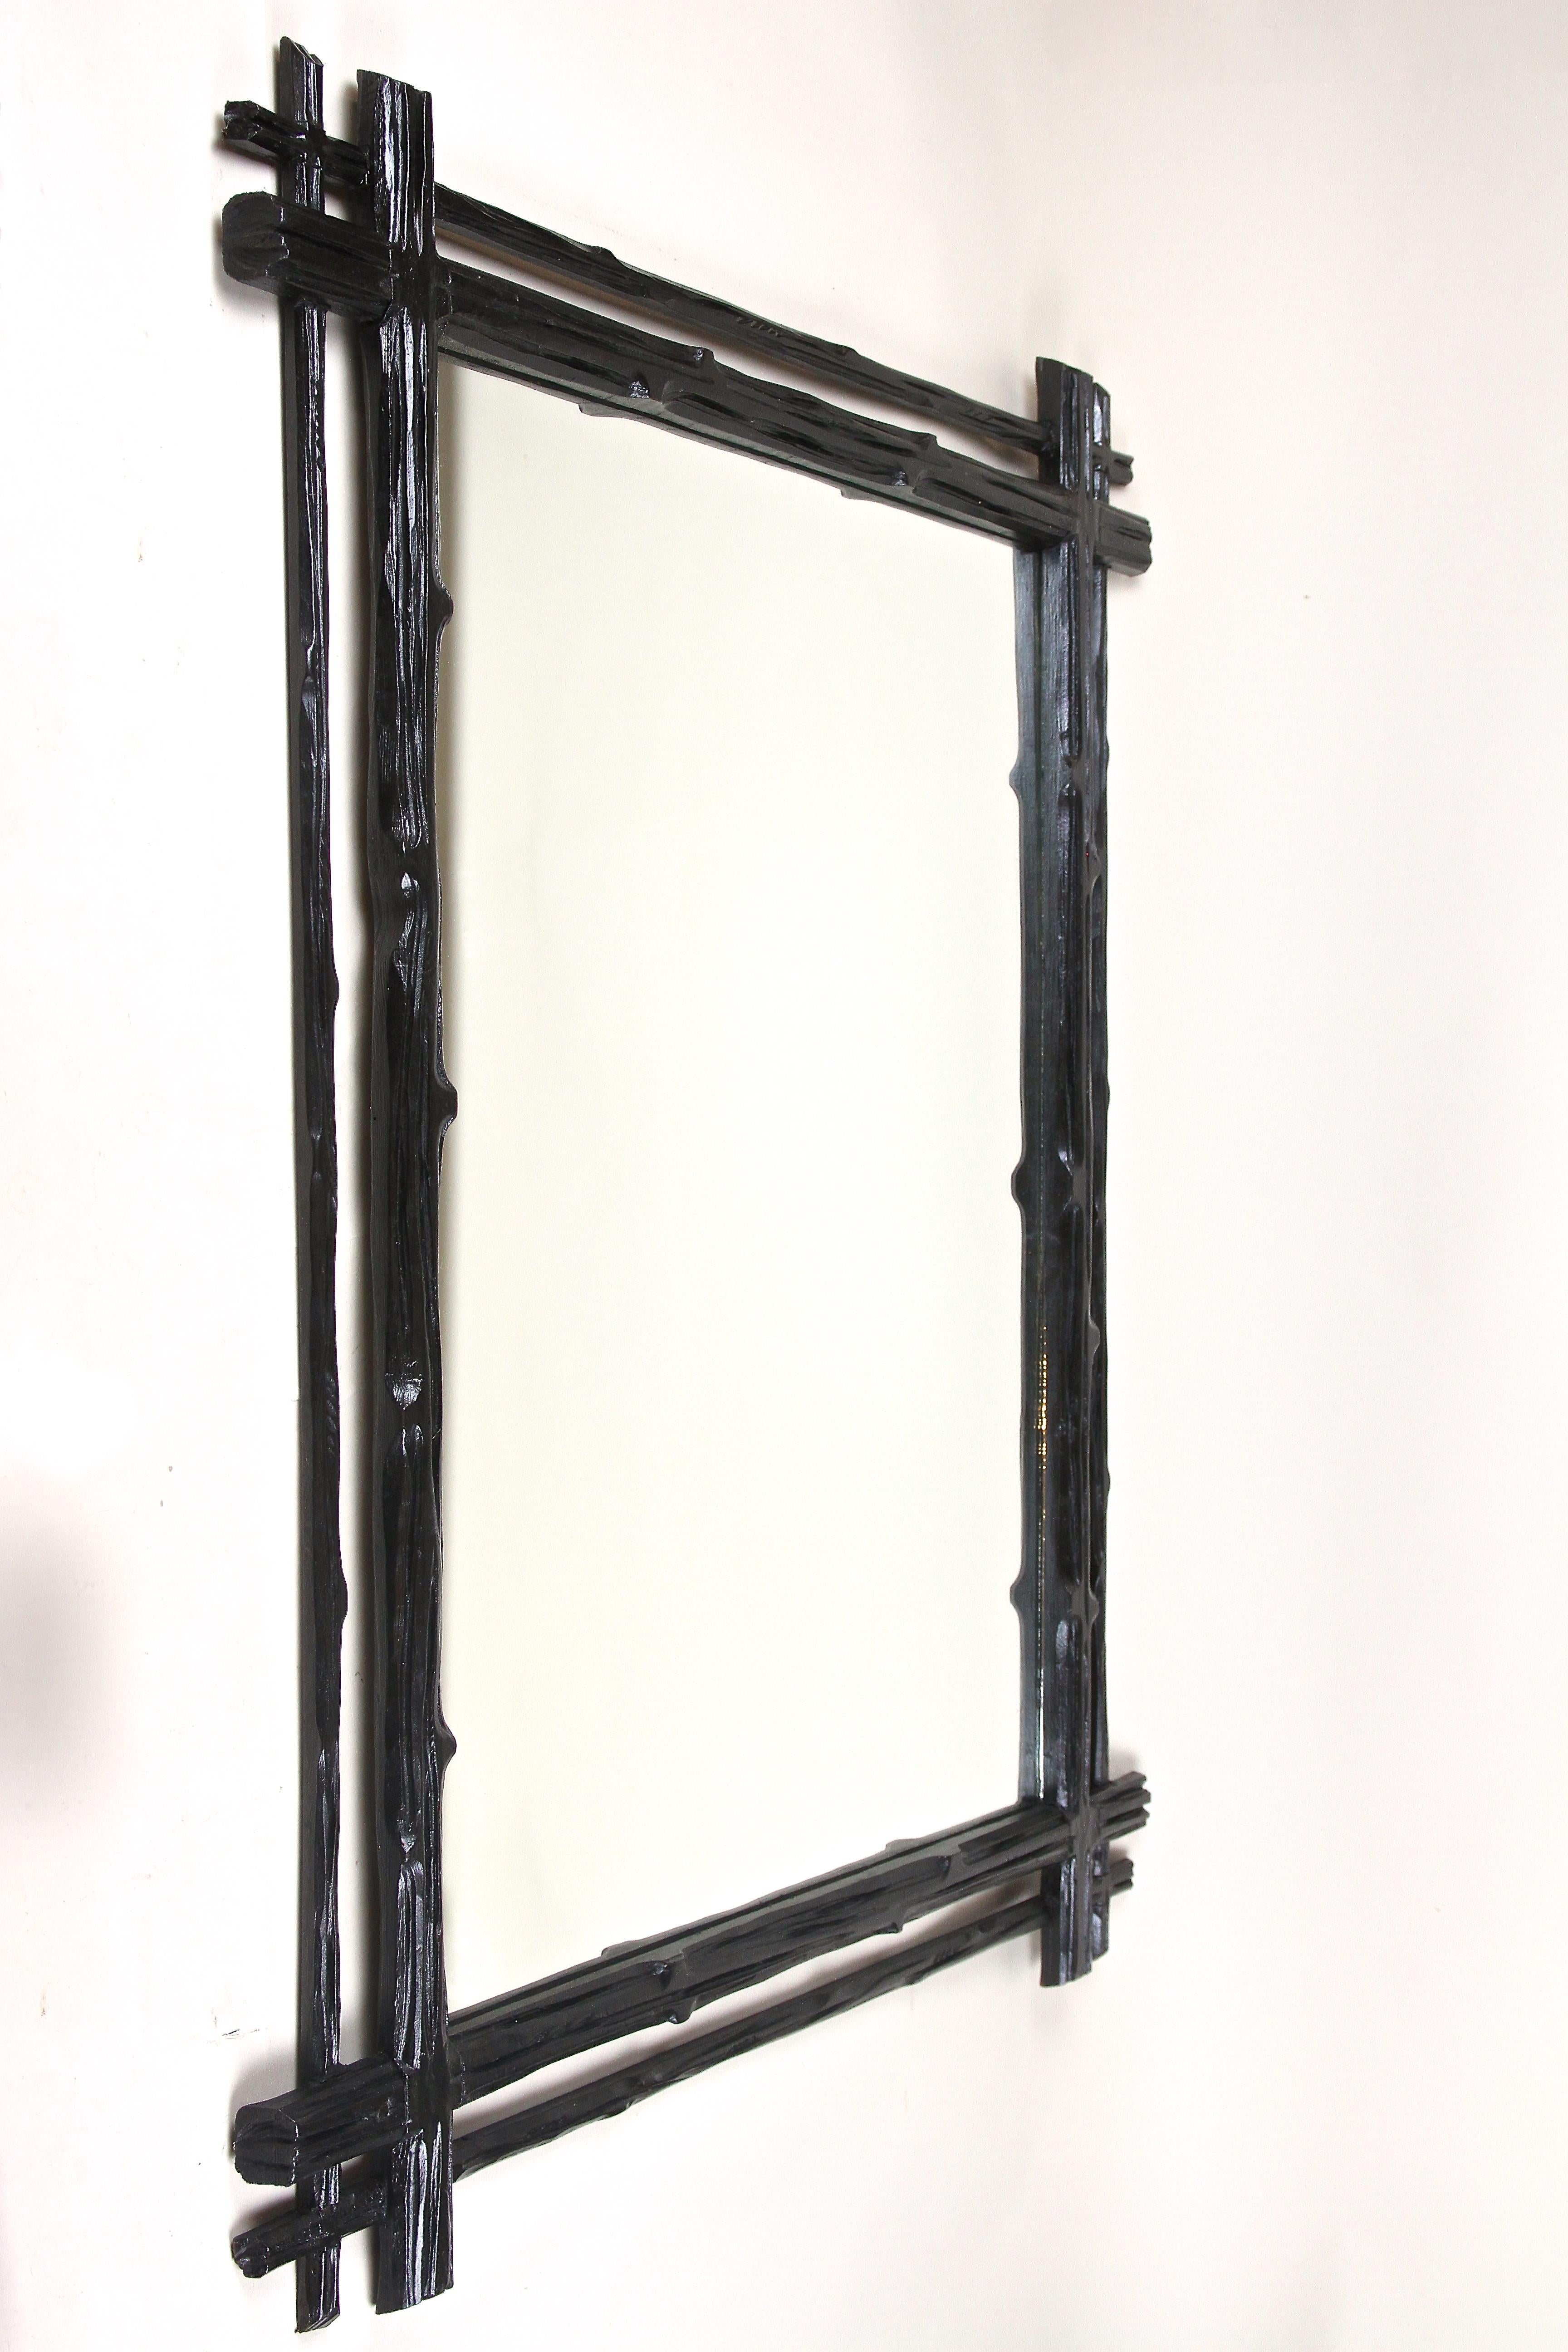 Exceptional large carved Black Forest Wall Mirror from the late 19th century around 1880 in Austria. This beautiful rustic Black Forest mirror has been elaborately hand crafted out of basswood and comes with an almost black varnished surface. Framed